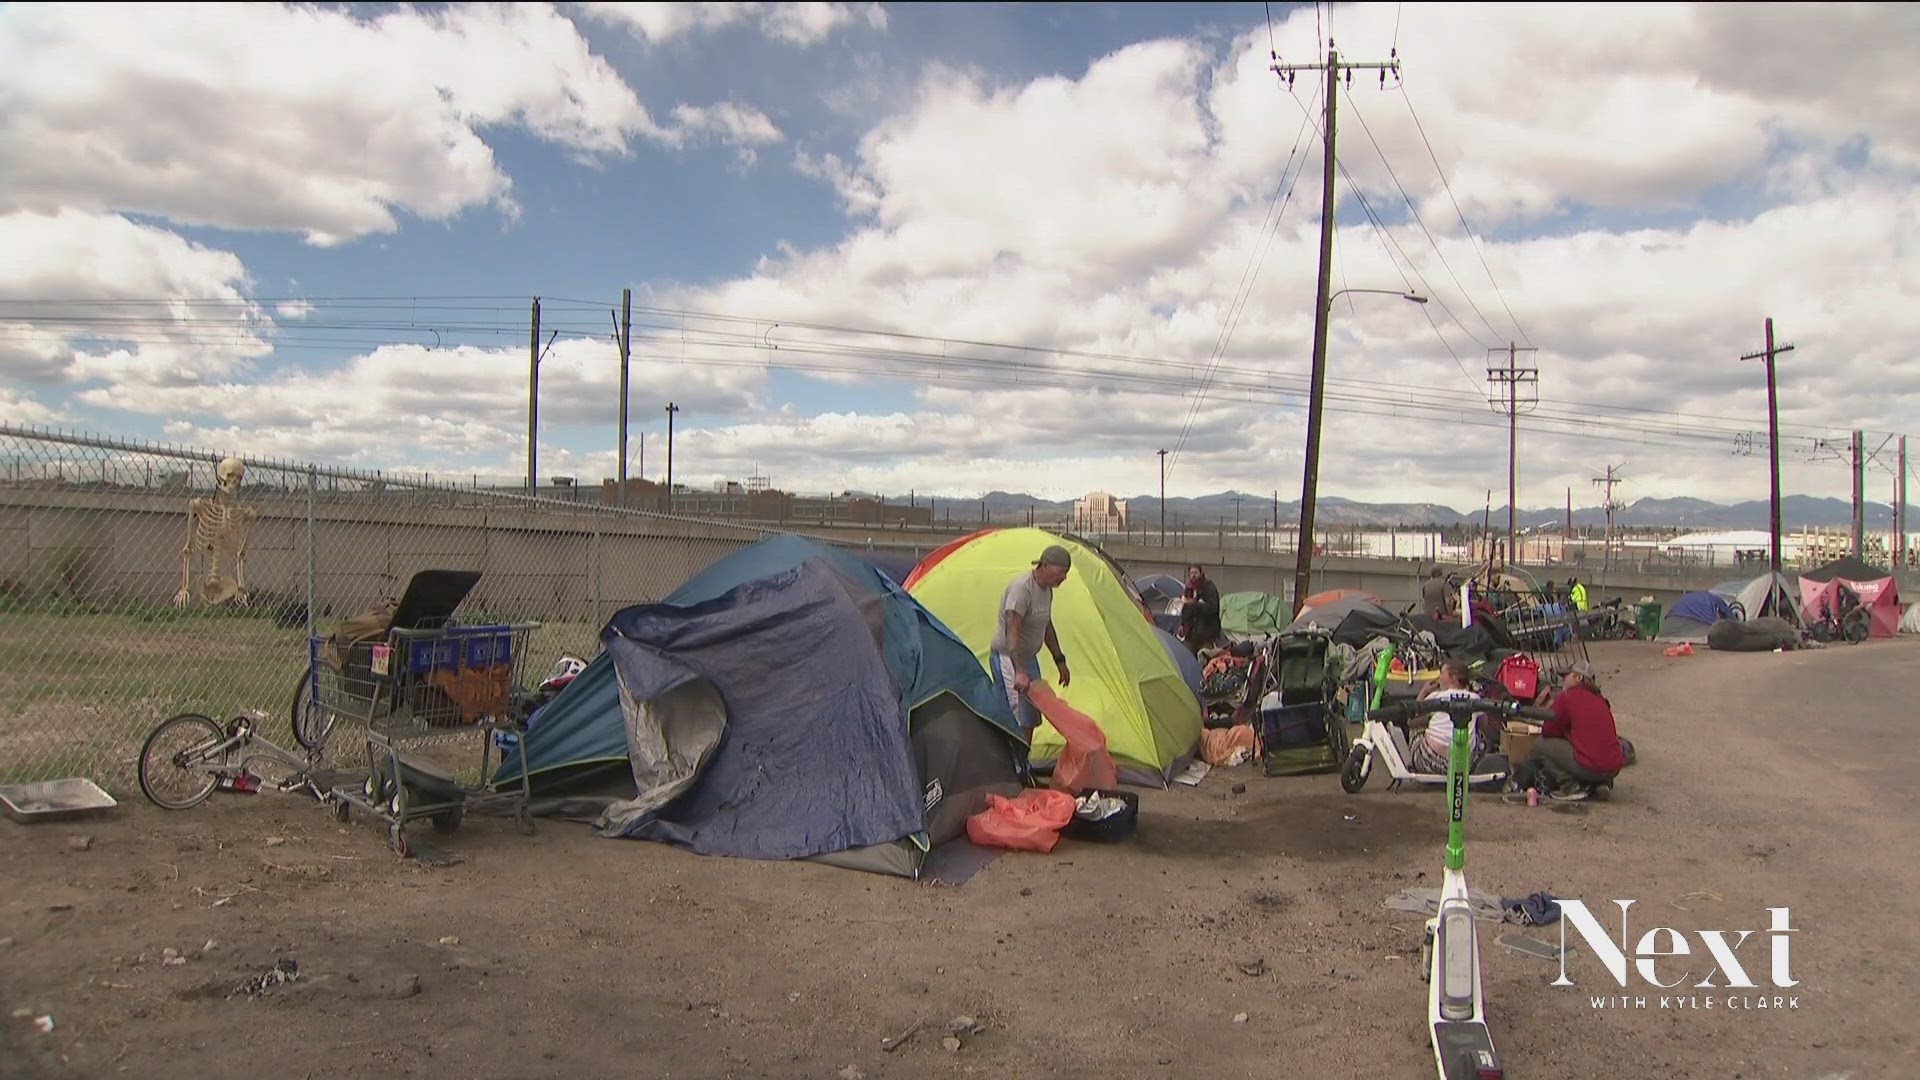 Denver's lofty goal to move people out of street encampments and into individual shelter is on pause with those beds full.